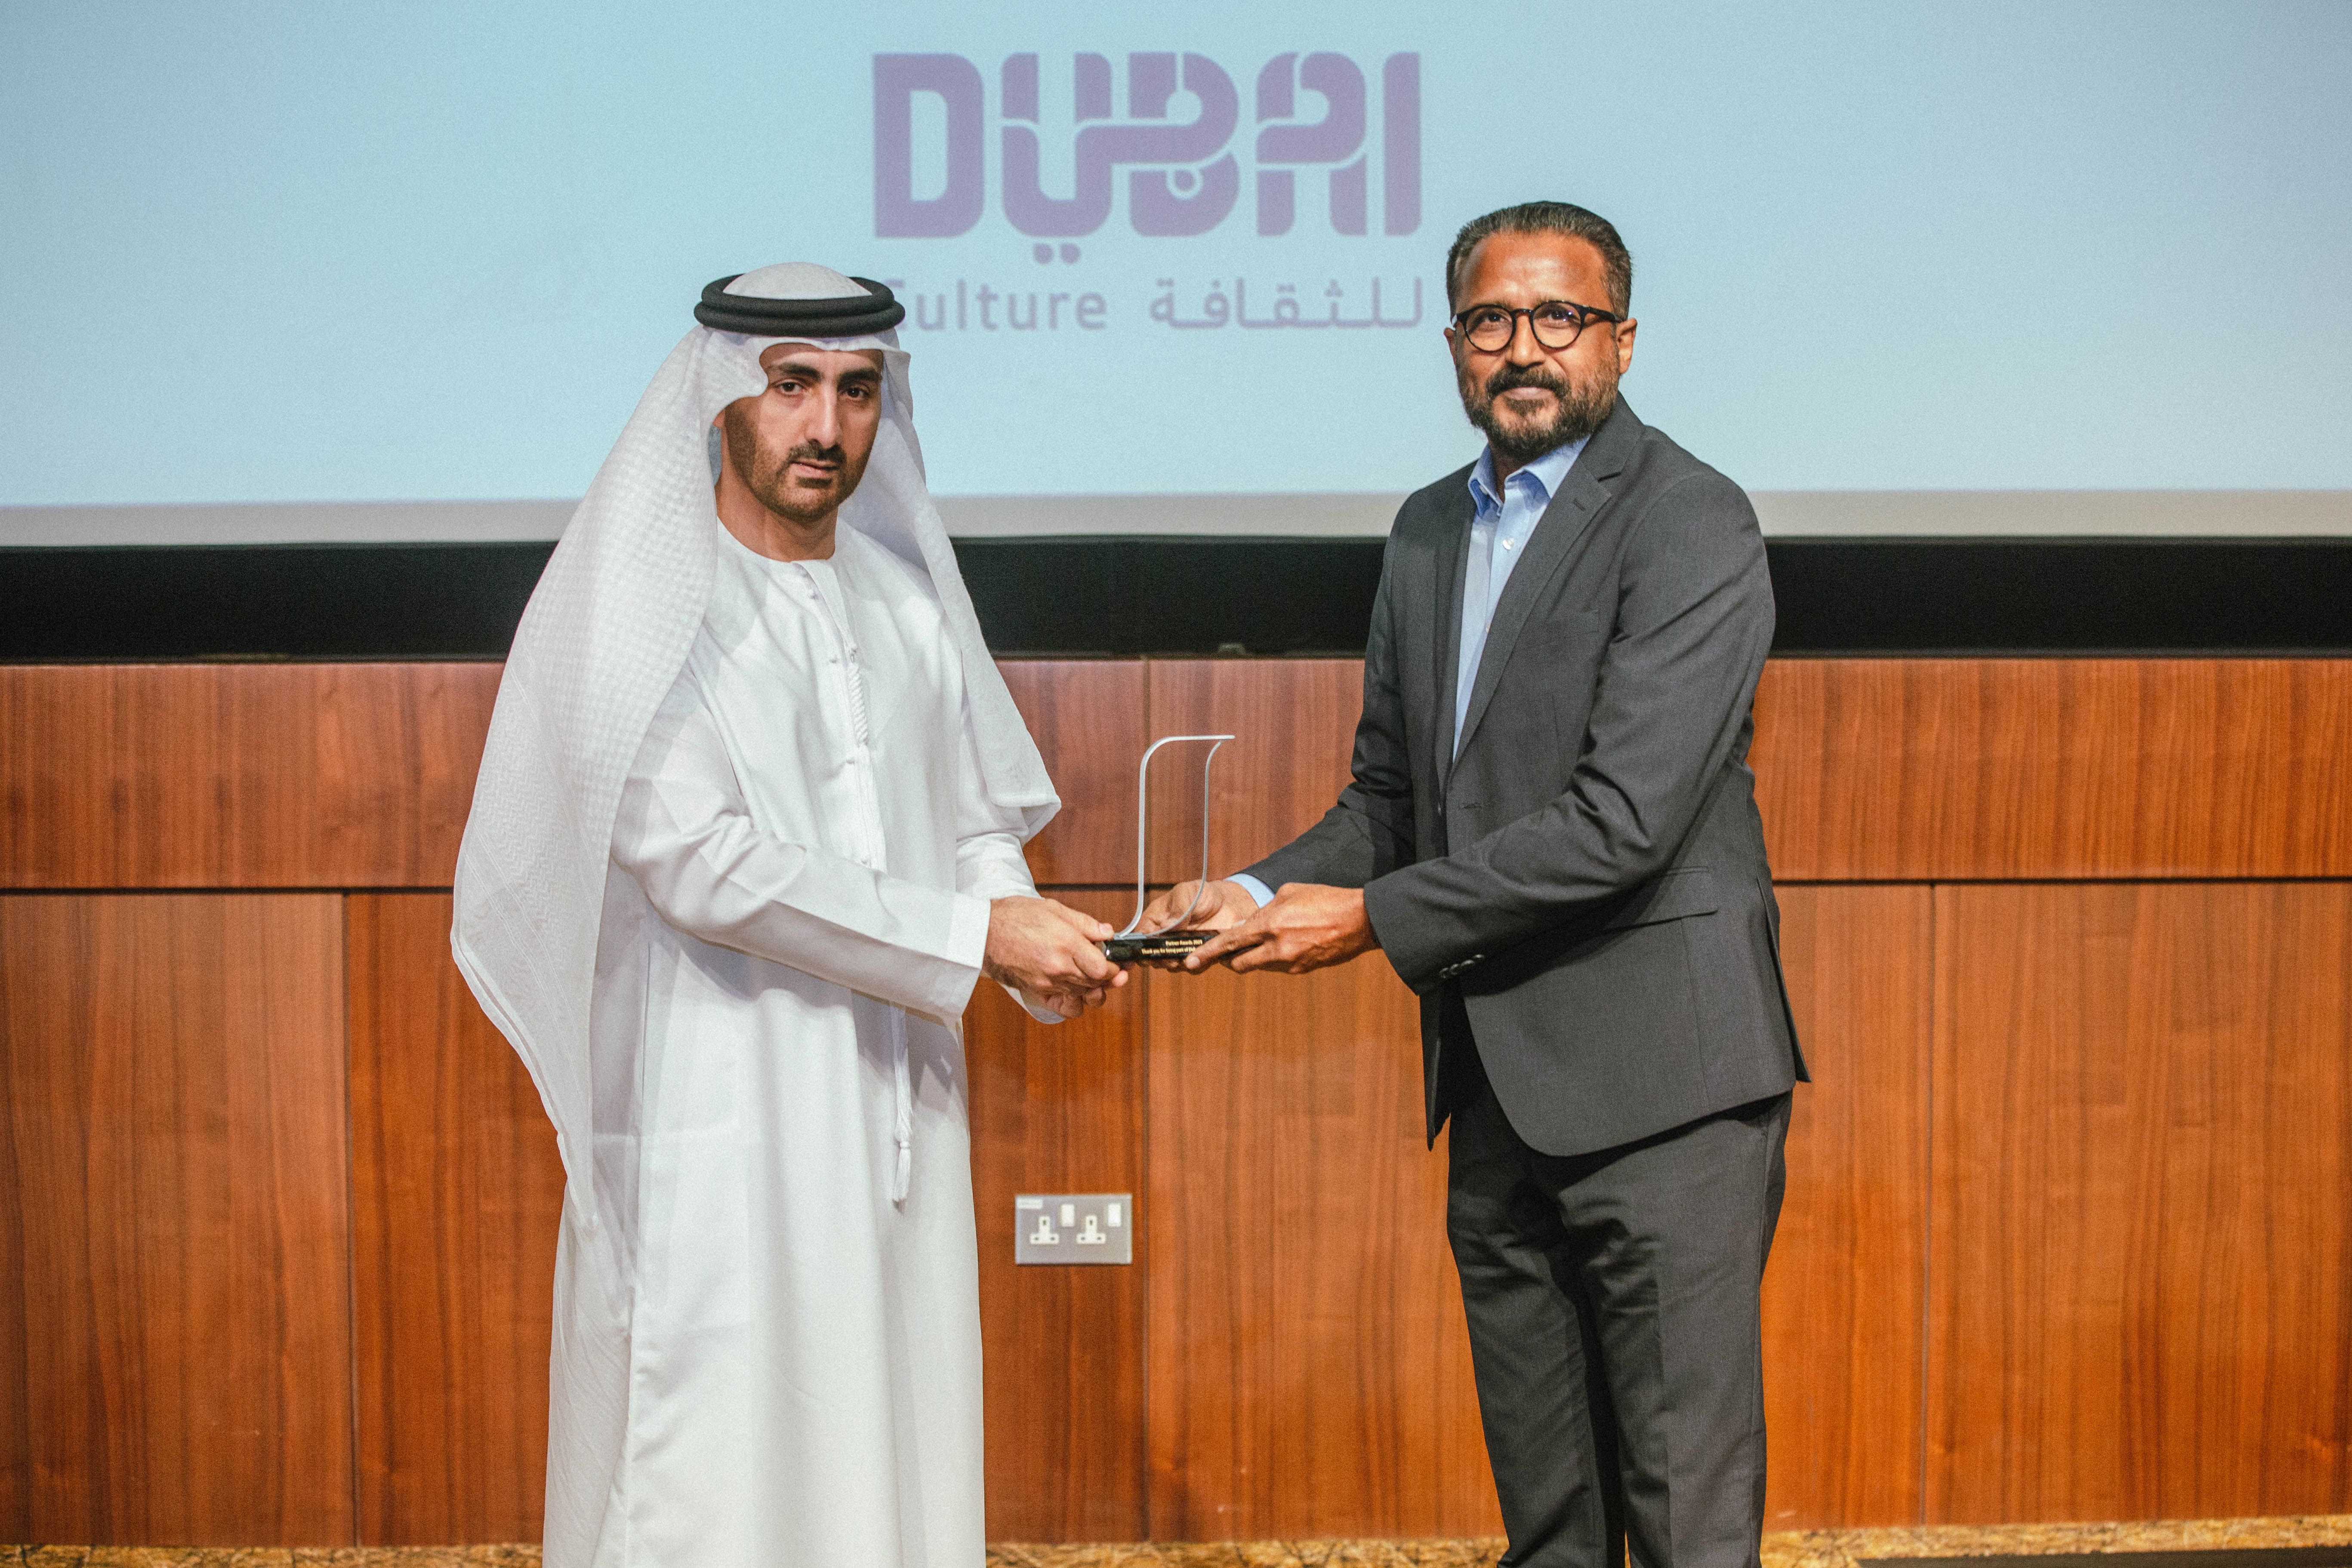 Timesworld honored by Dubai Culture & Arts Authority